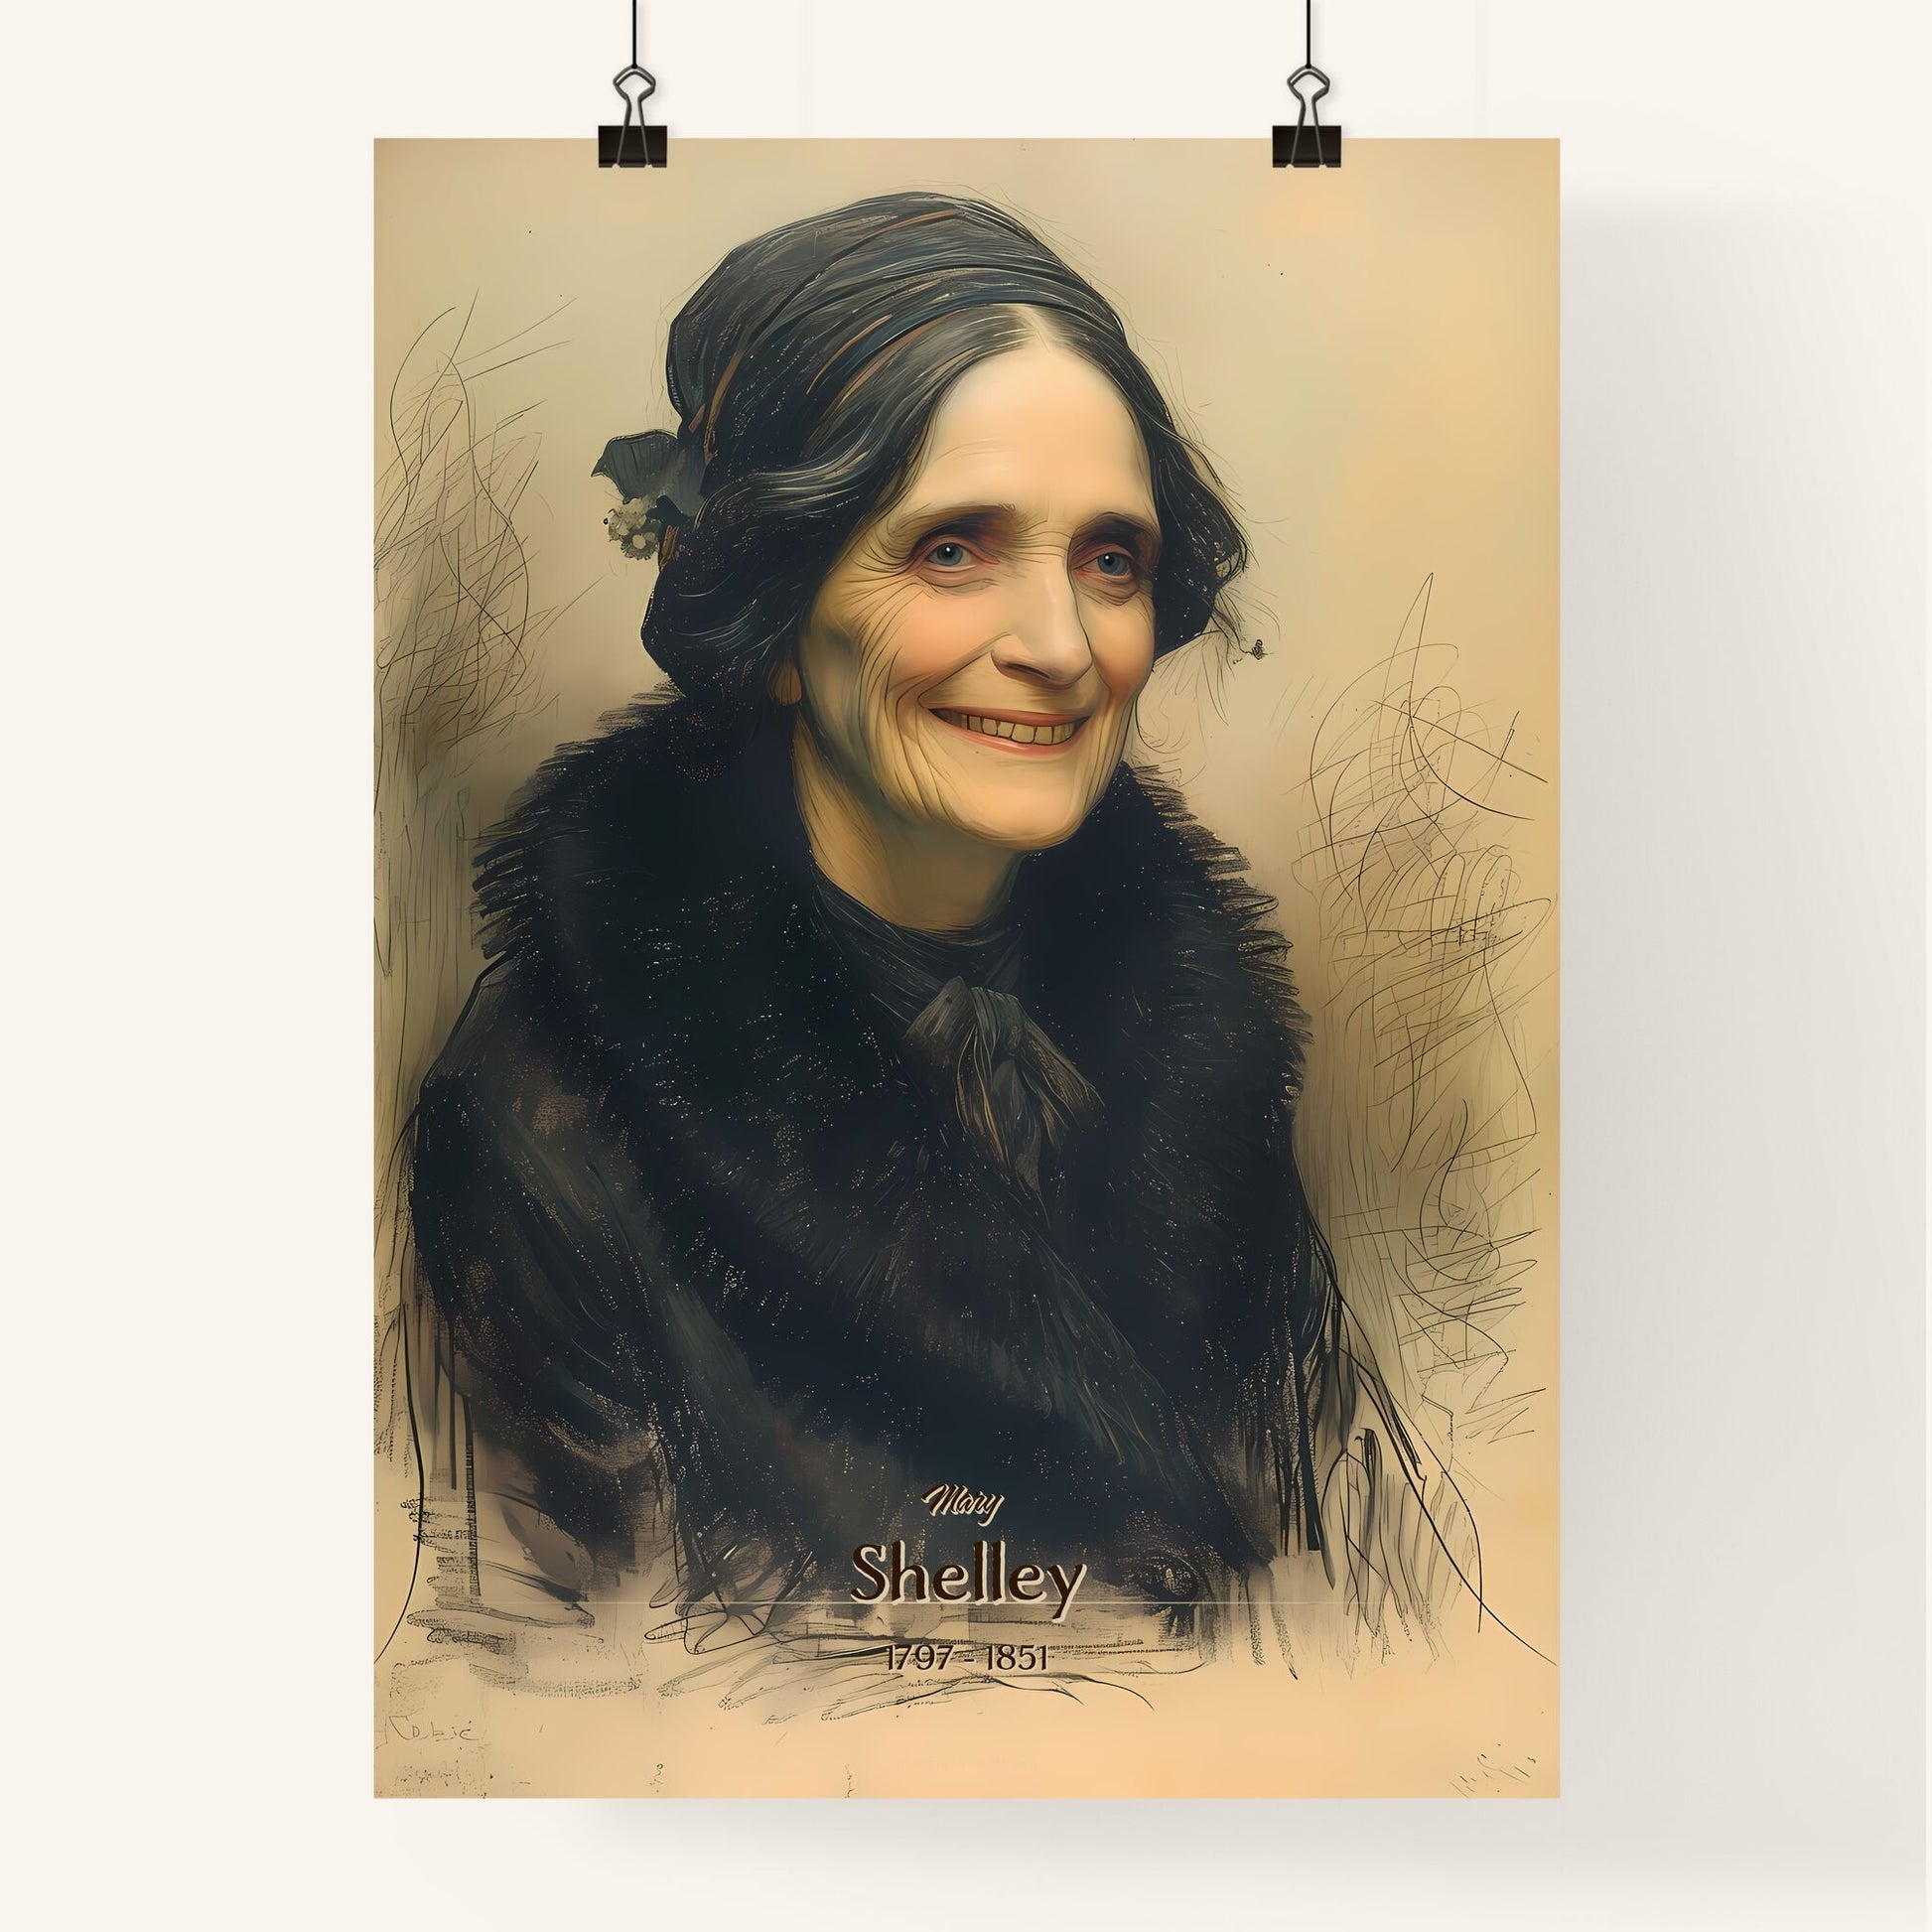 Mary, Shelley, 1797 - 1851, A Poster of a woman smiling at the camera Default Title